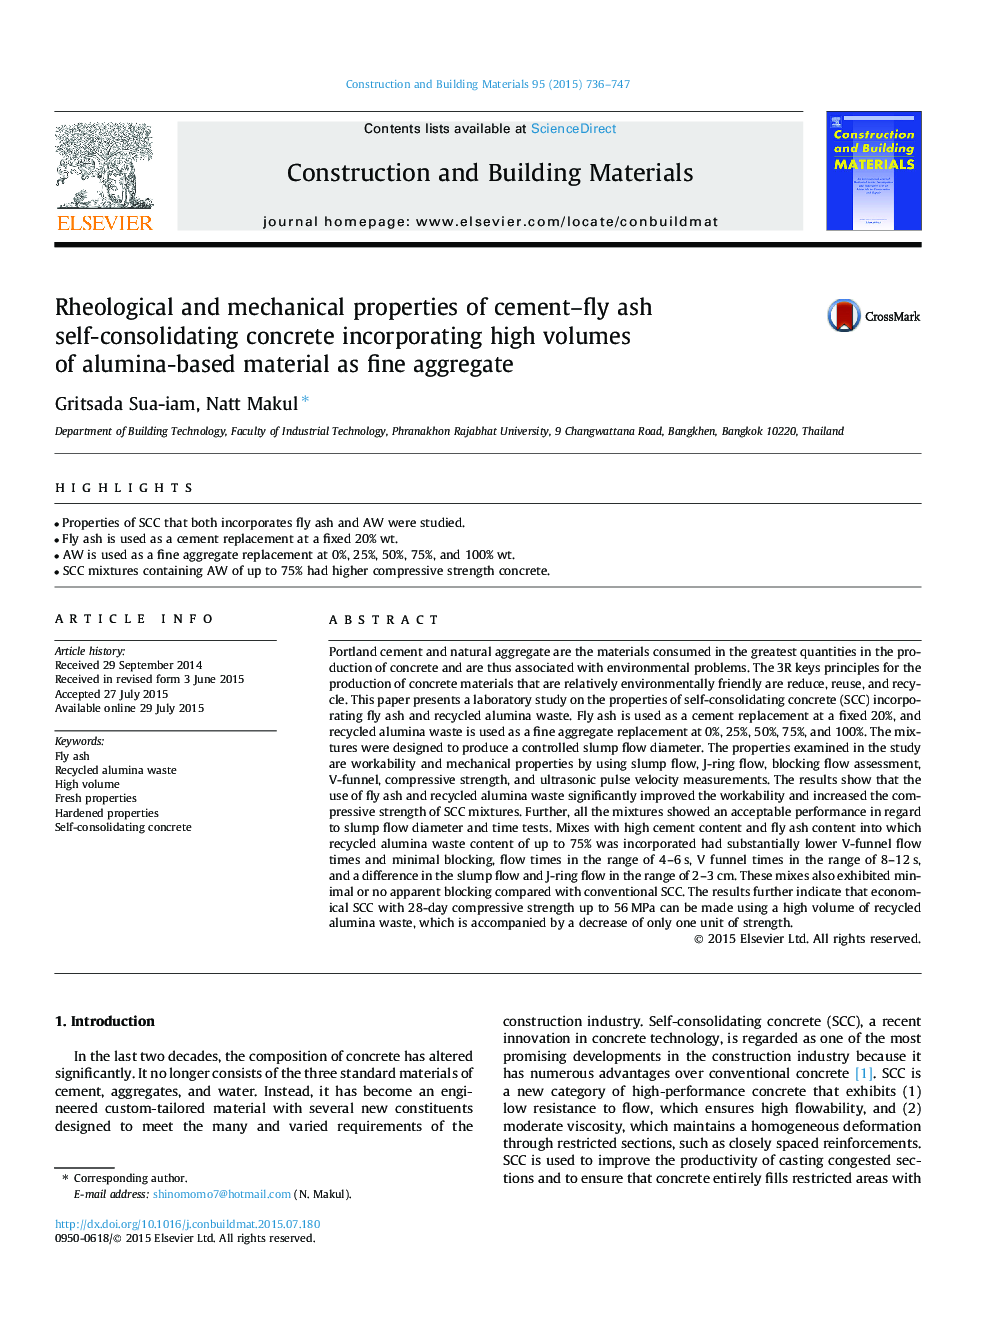 Rheological and mechanical properties of cement–fly ash self-consolidating concrete incorporating high volumes of alumina-based material as fine aggregate